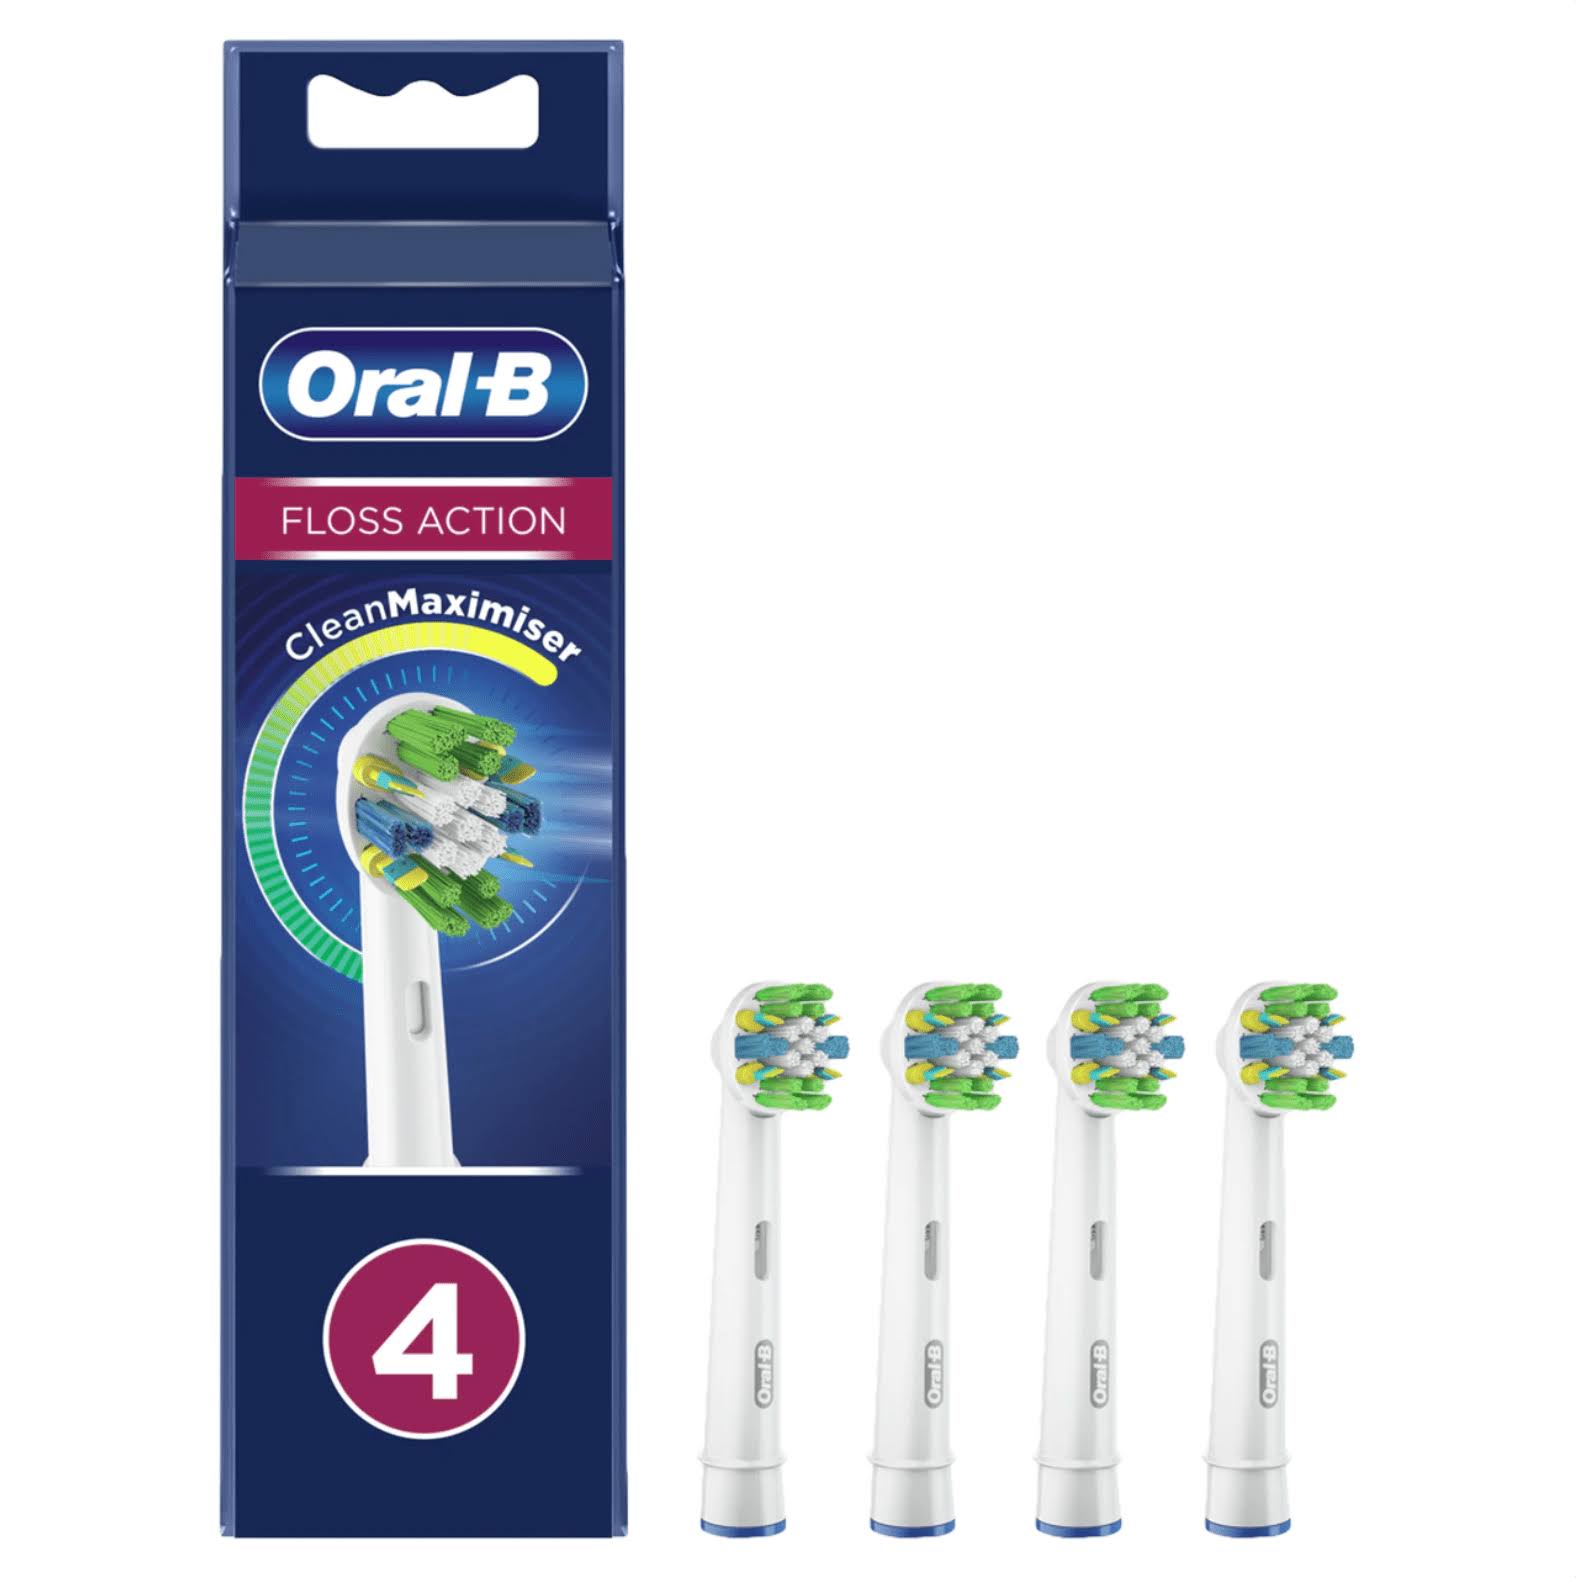 Oral-B FlossAction Power Toothbrush Refill Heads - Micro Pulse Bristles - 4 Pack